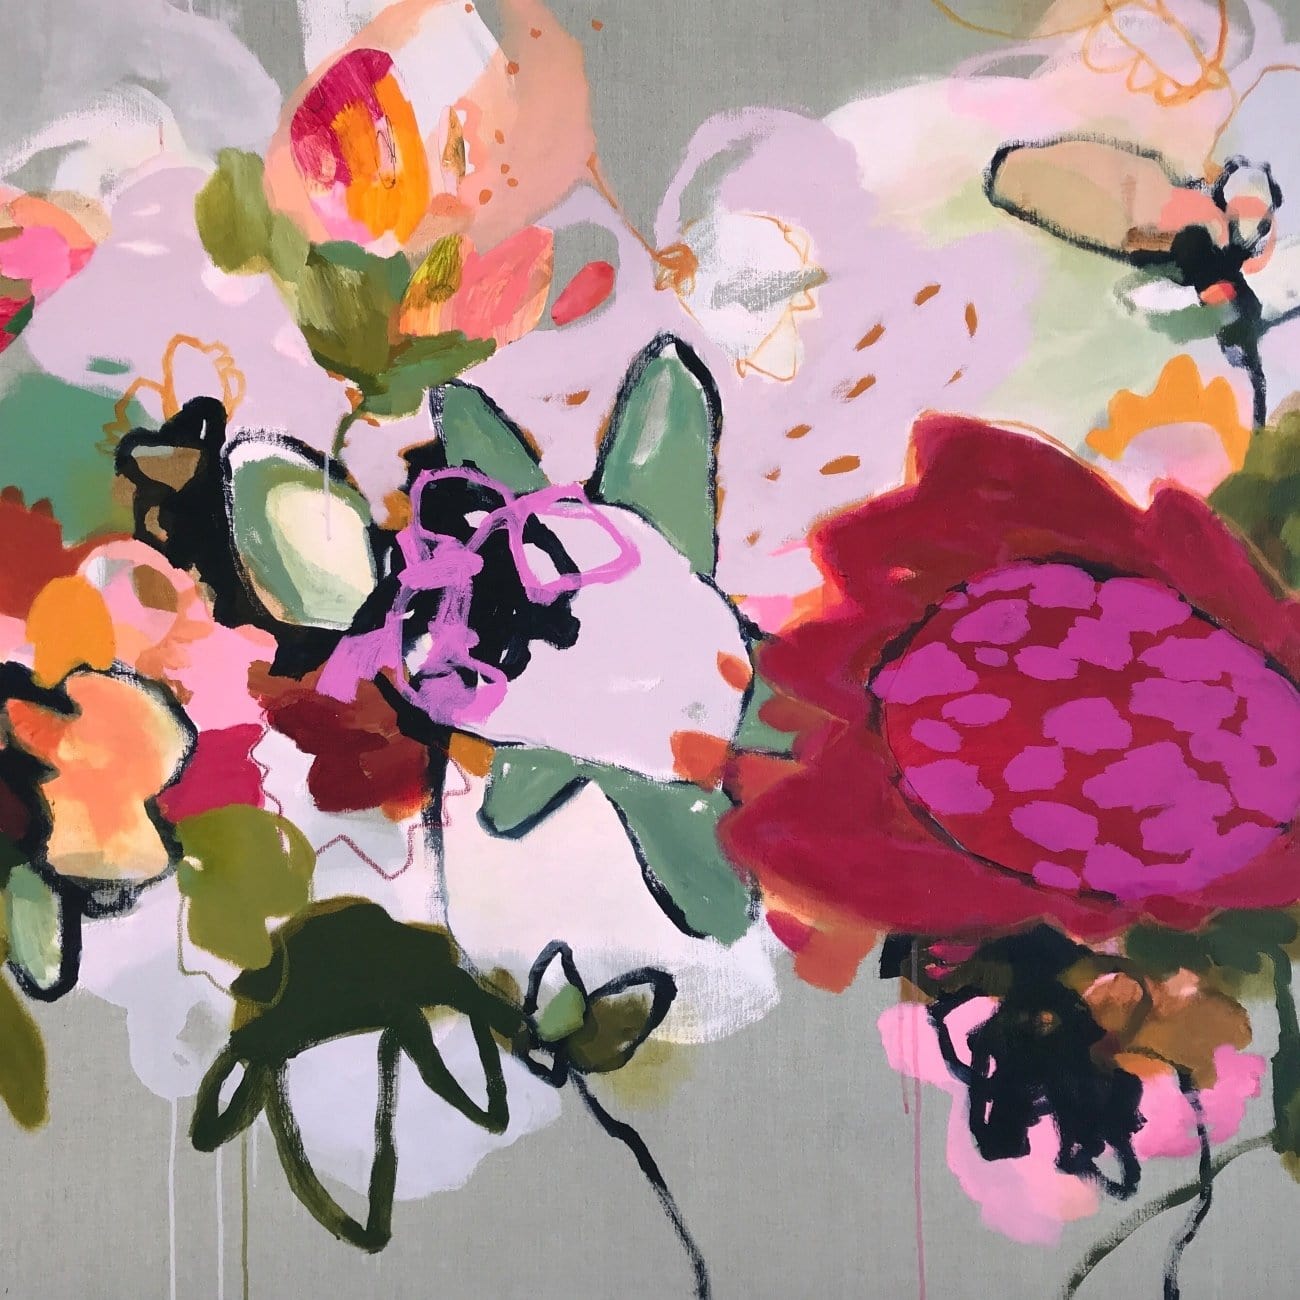 Enchanted - Limited Edition Print-Prints-Kate Owen-Greenhouse Interiors